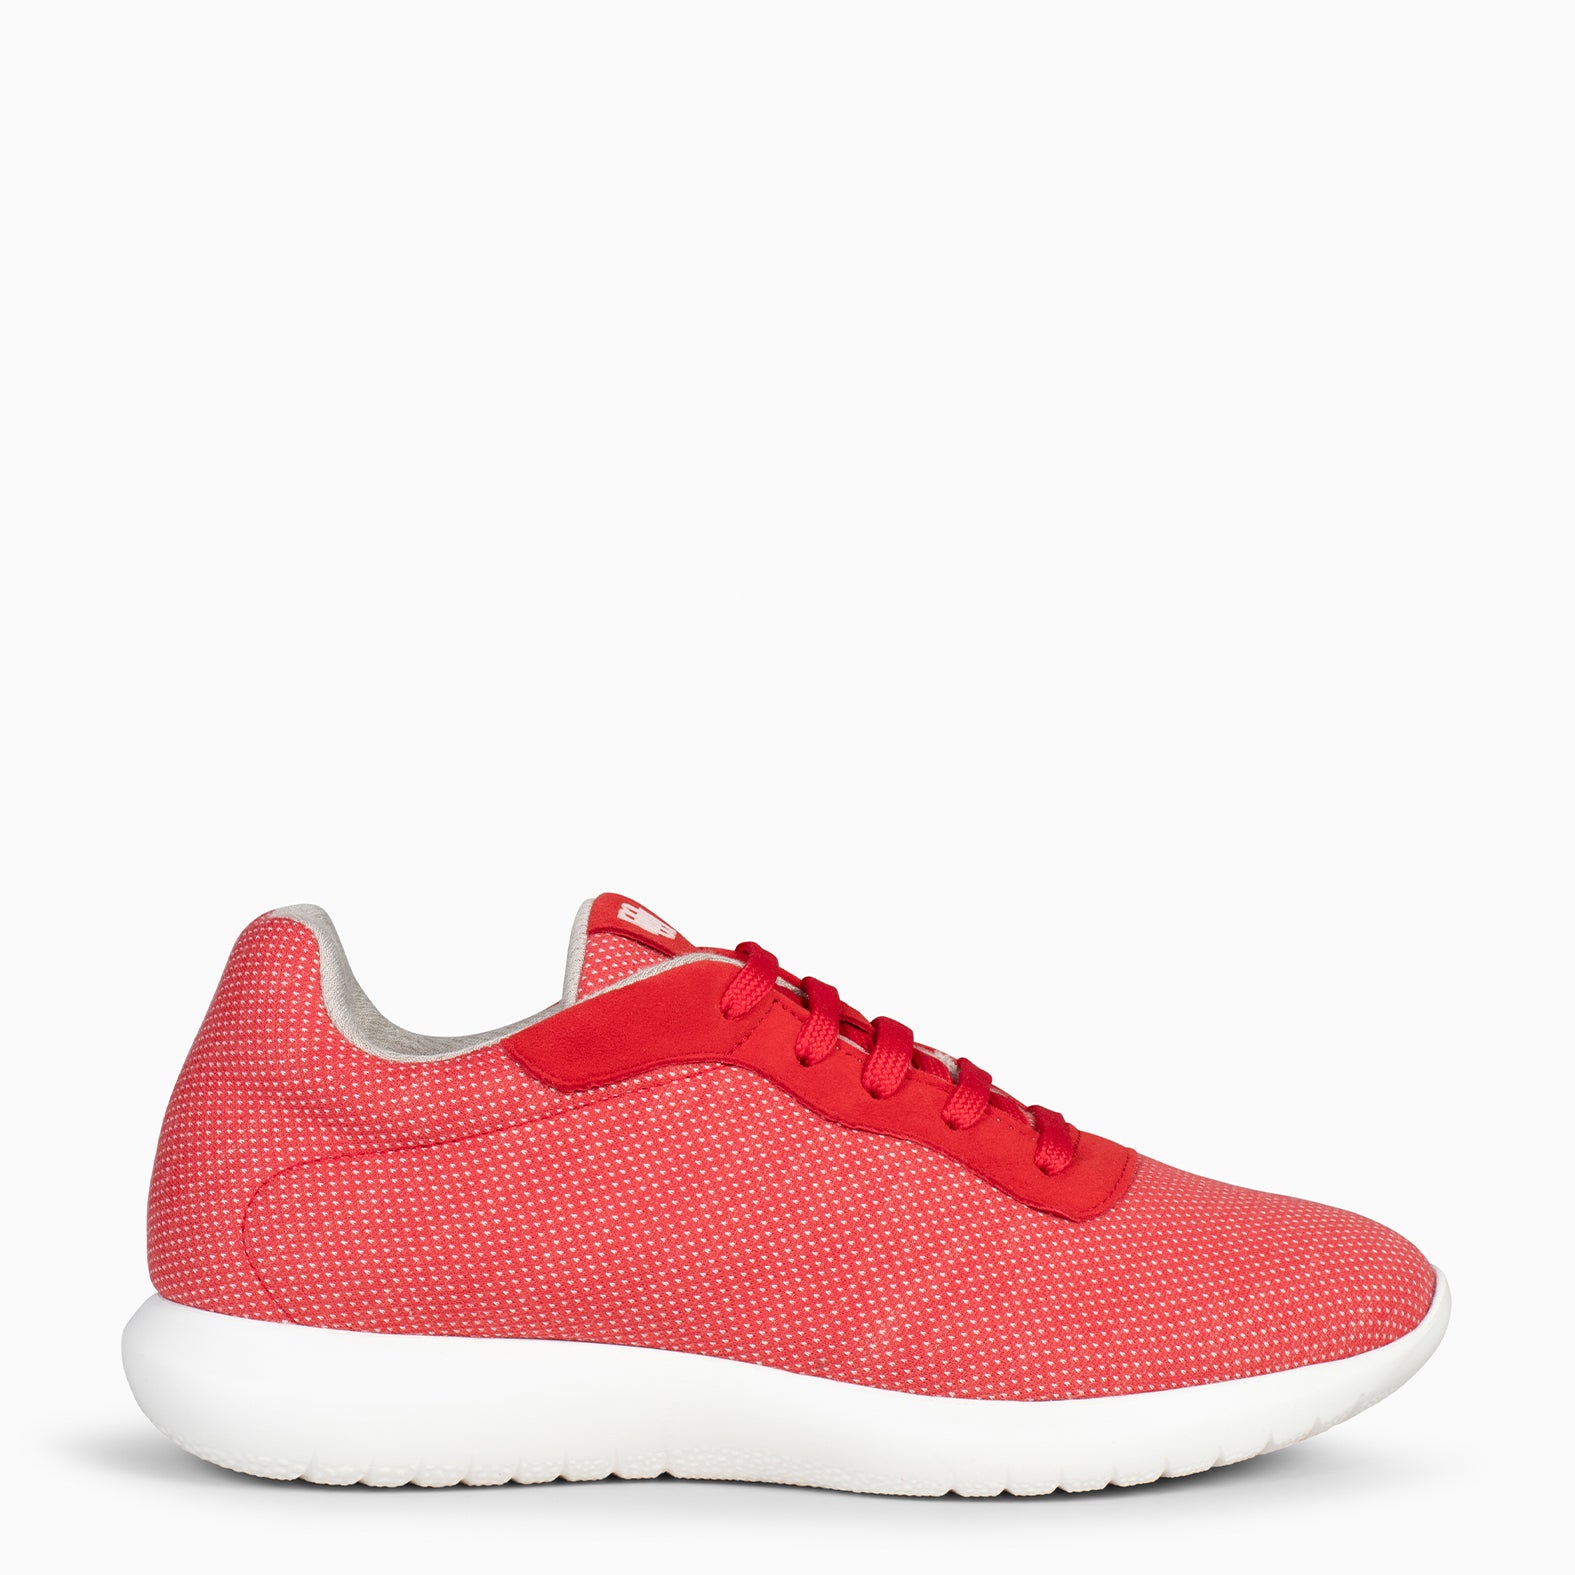 YOGA – RED sneakers crafted in merino wool